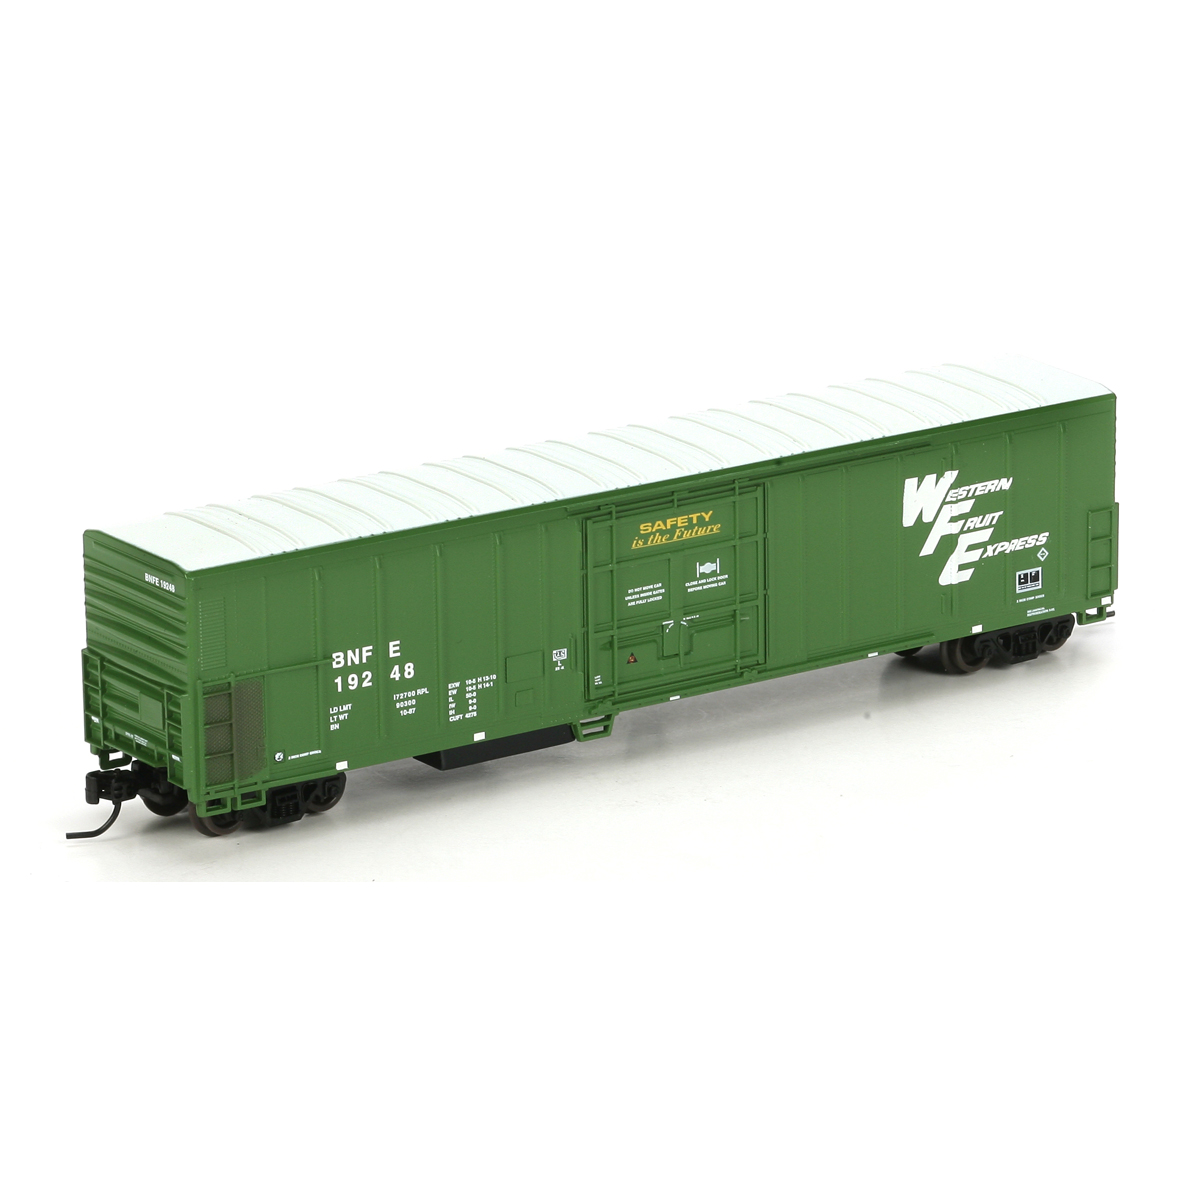 N Scale - Athearn - 17473 - Reefer, 57 Foot, Mechanical, PC&F R-70-20 - Western Fruit Express - 19248